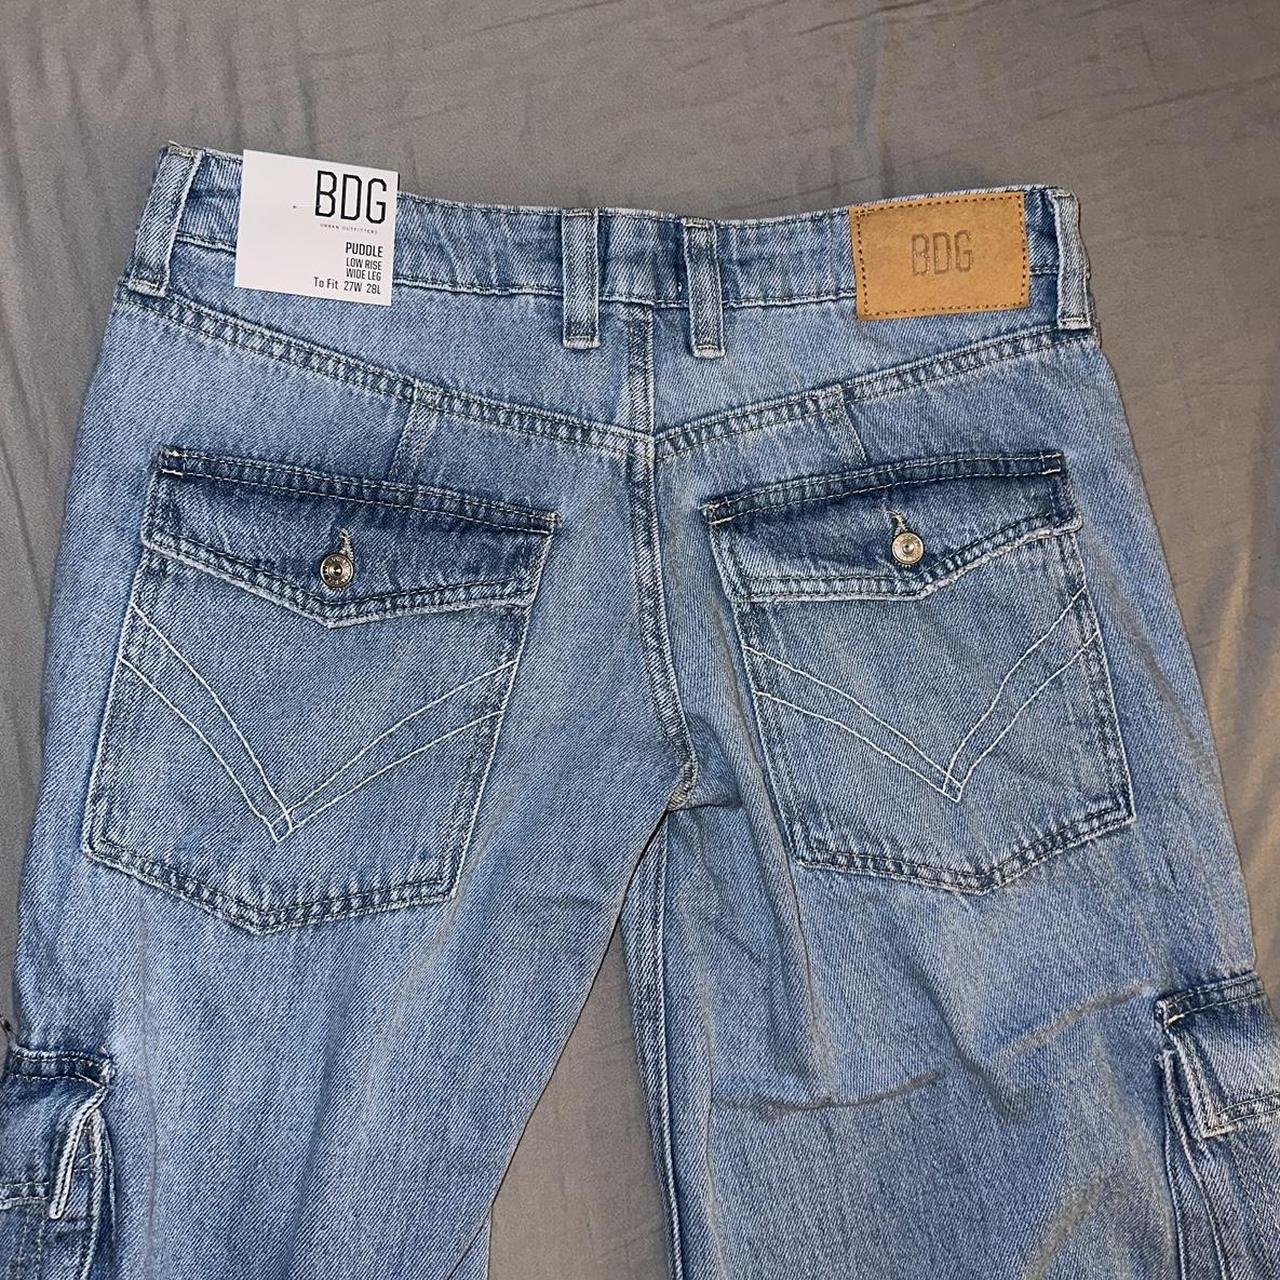 Urban Outfitters Women's Jeans (4)